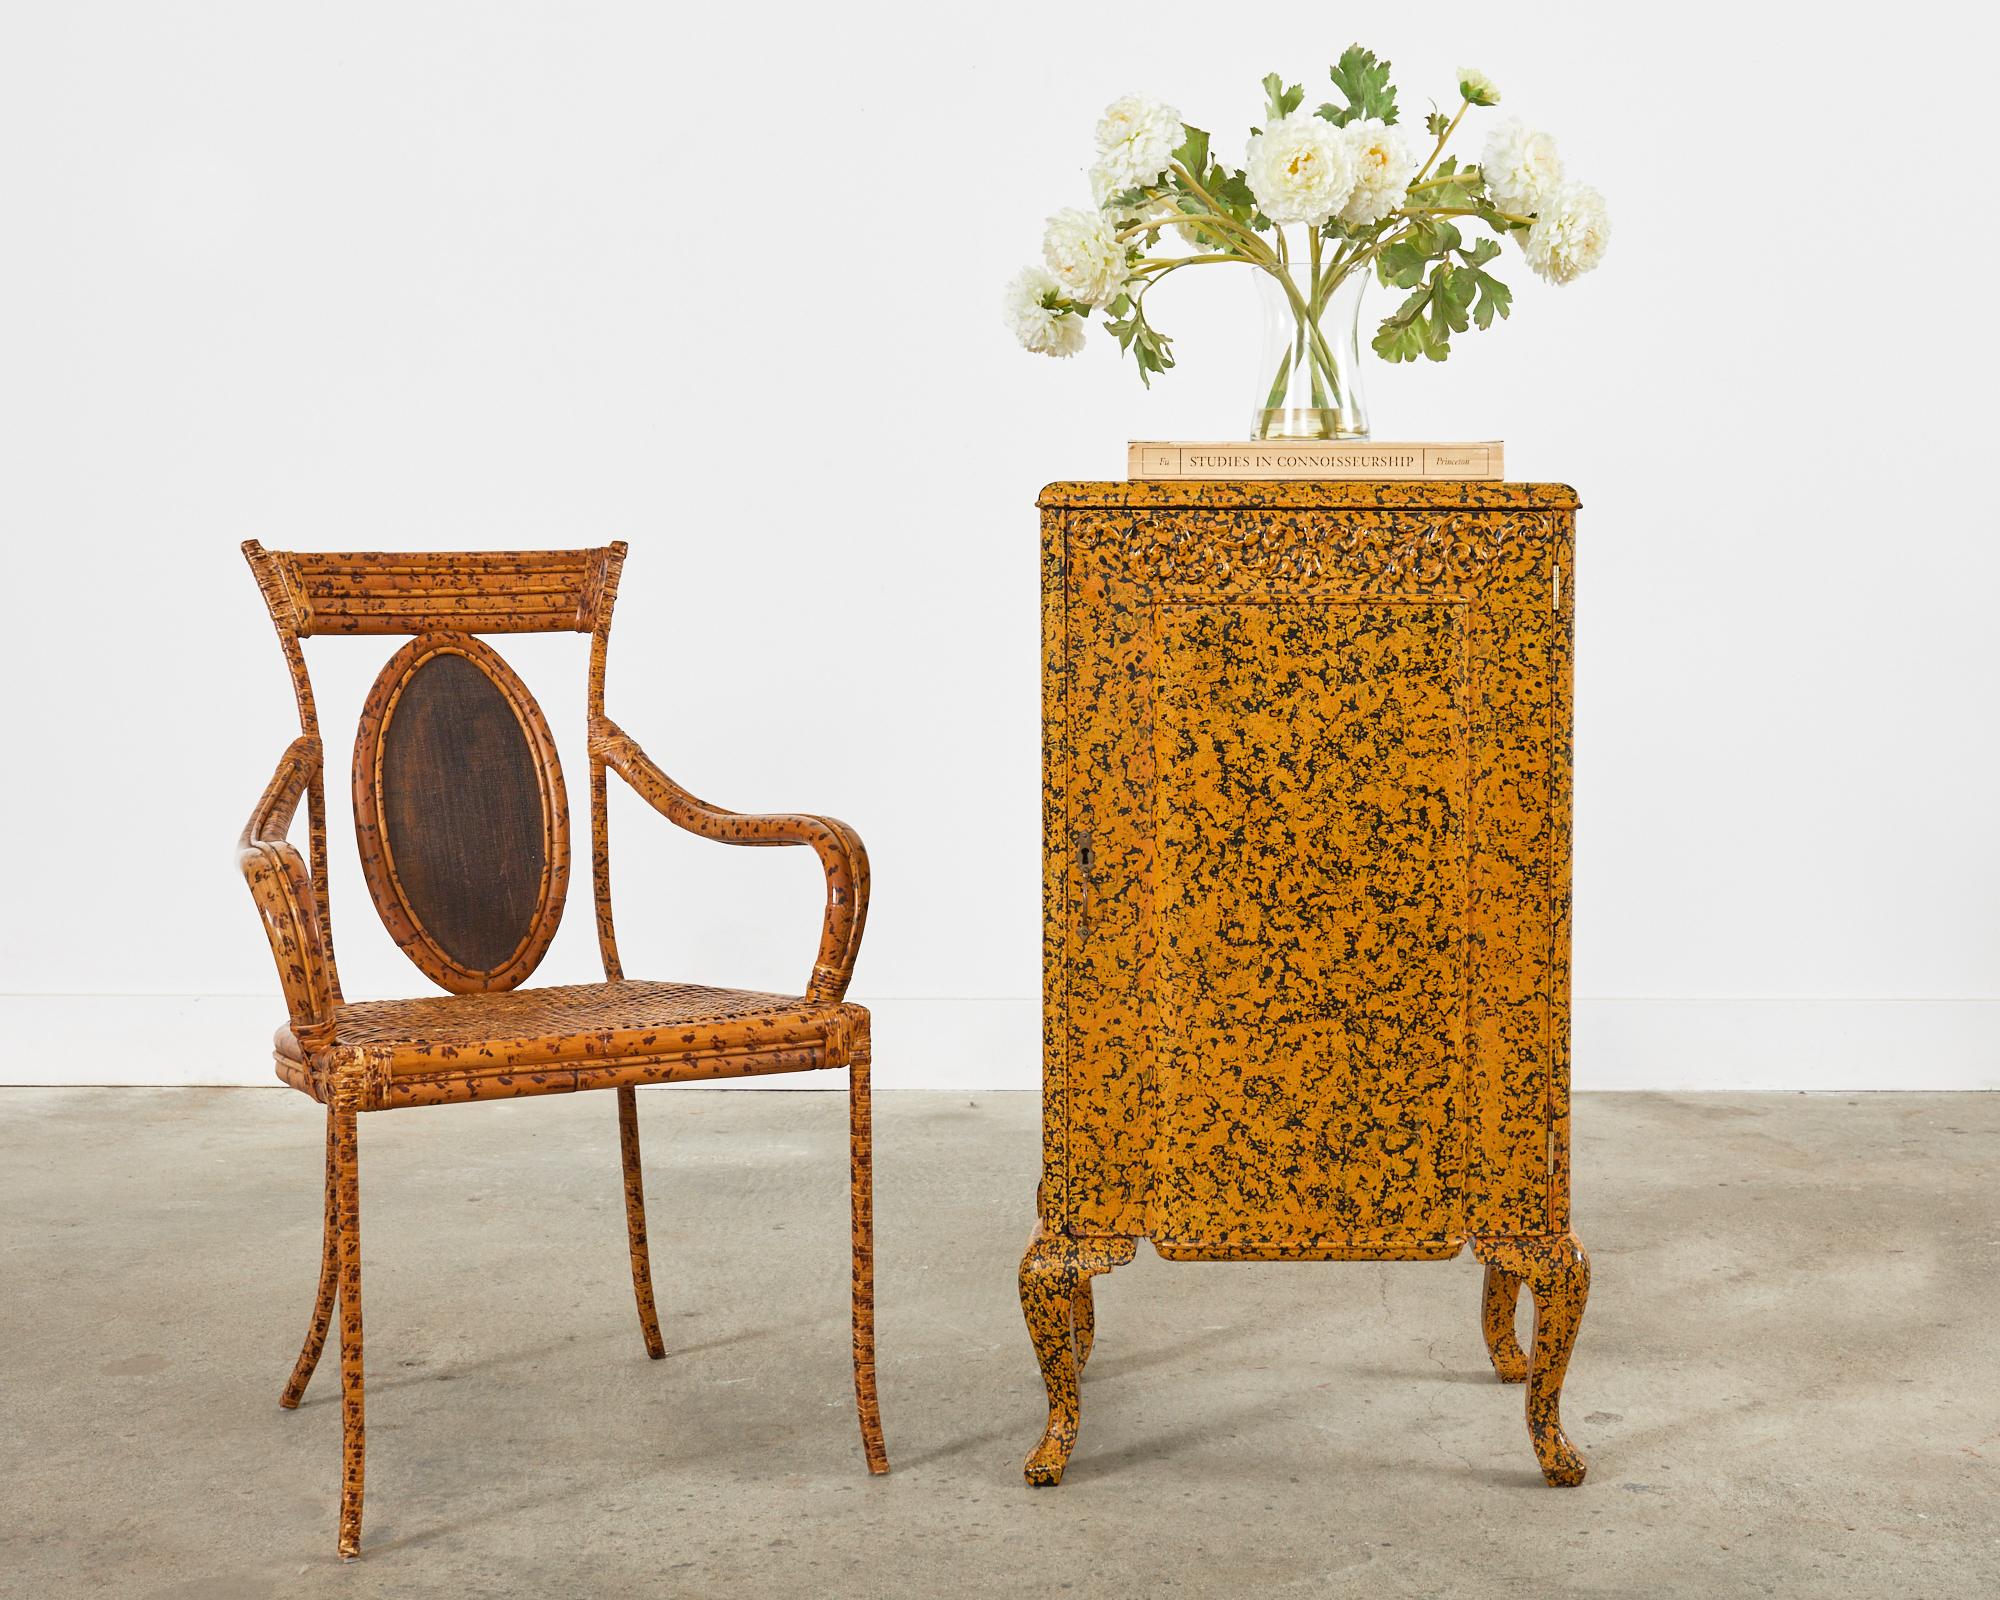 Charming 19th century mahogany cabinet or cupboard featuring a mustard yellow lacquer speckled finish by artist Ira Yeager (American 1938-2022). The cabinet is fronted by a large door with a small patinated brass pull. The door is decorated with